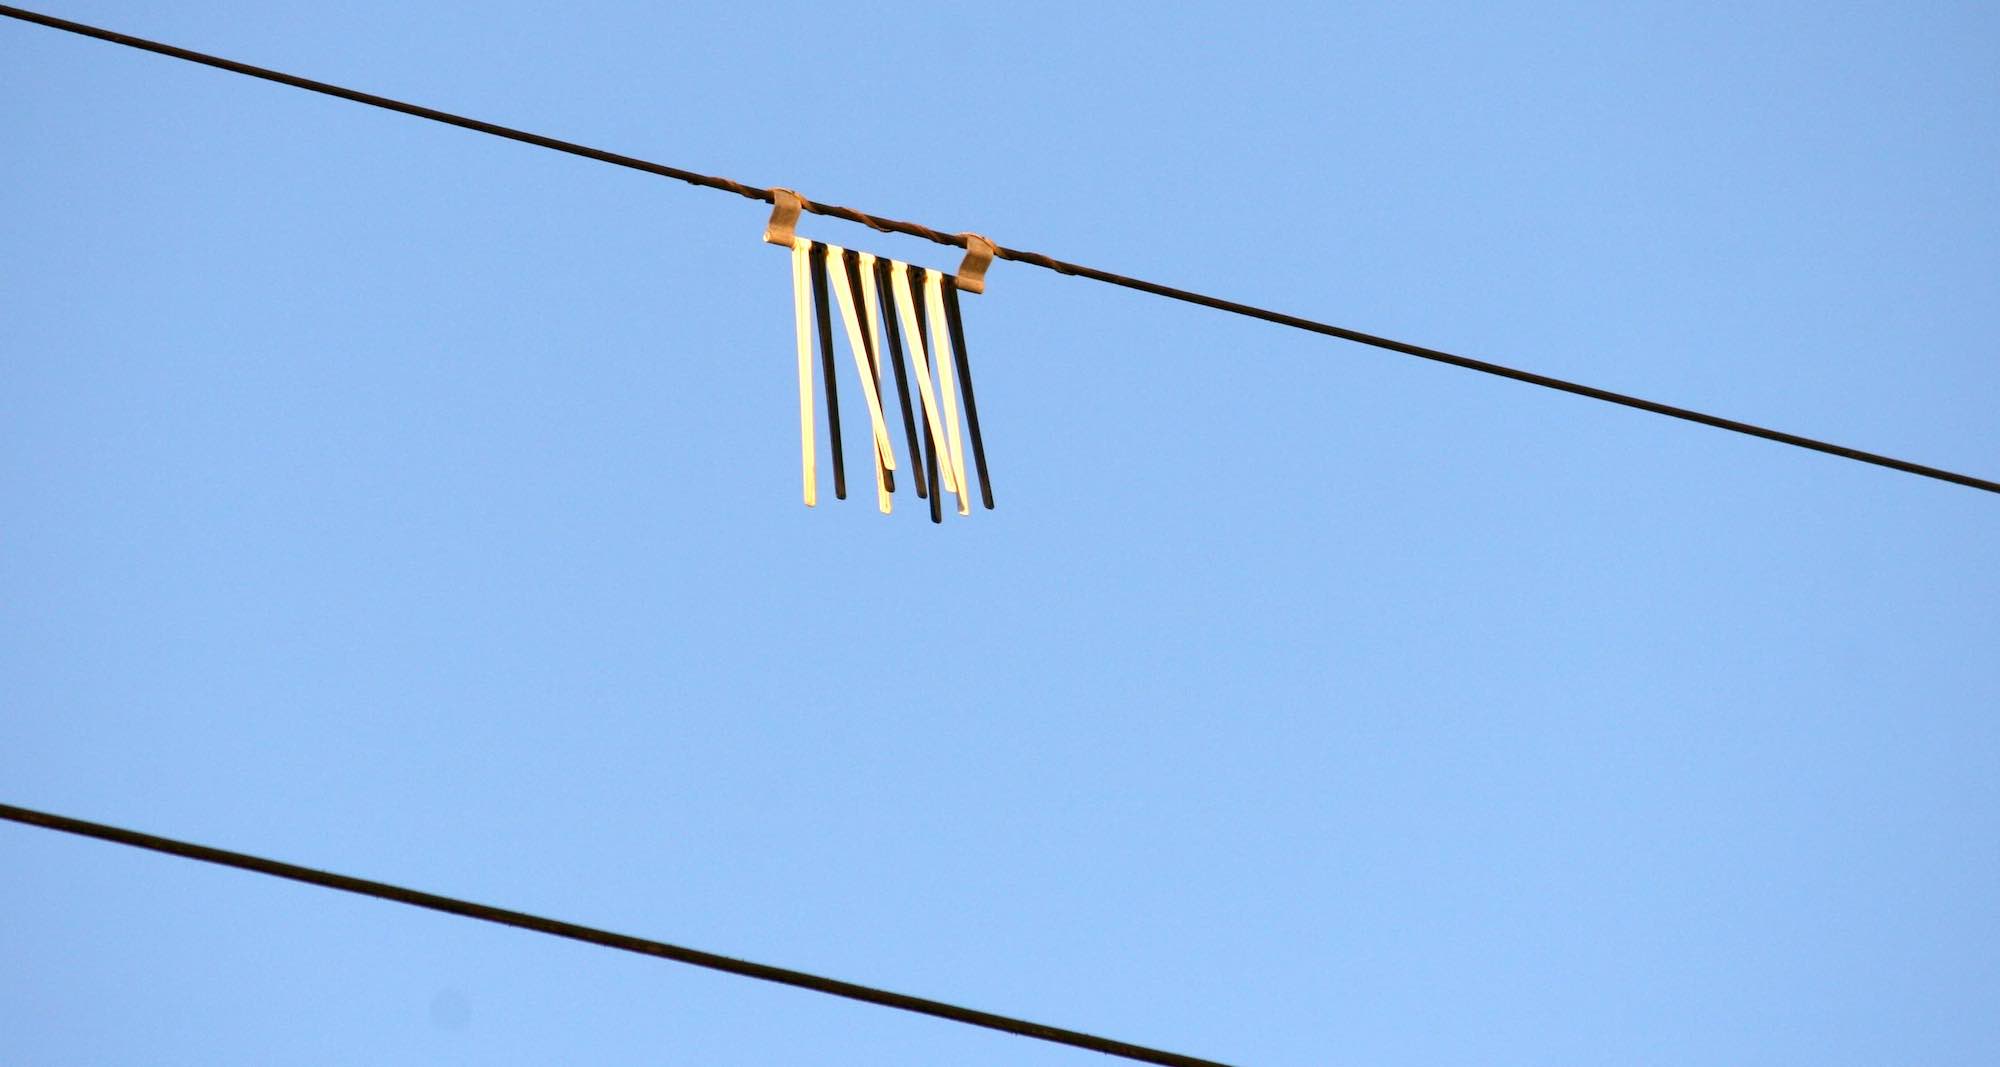 Hanging device that flaps in thw wind, attached to a power cable.